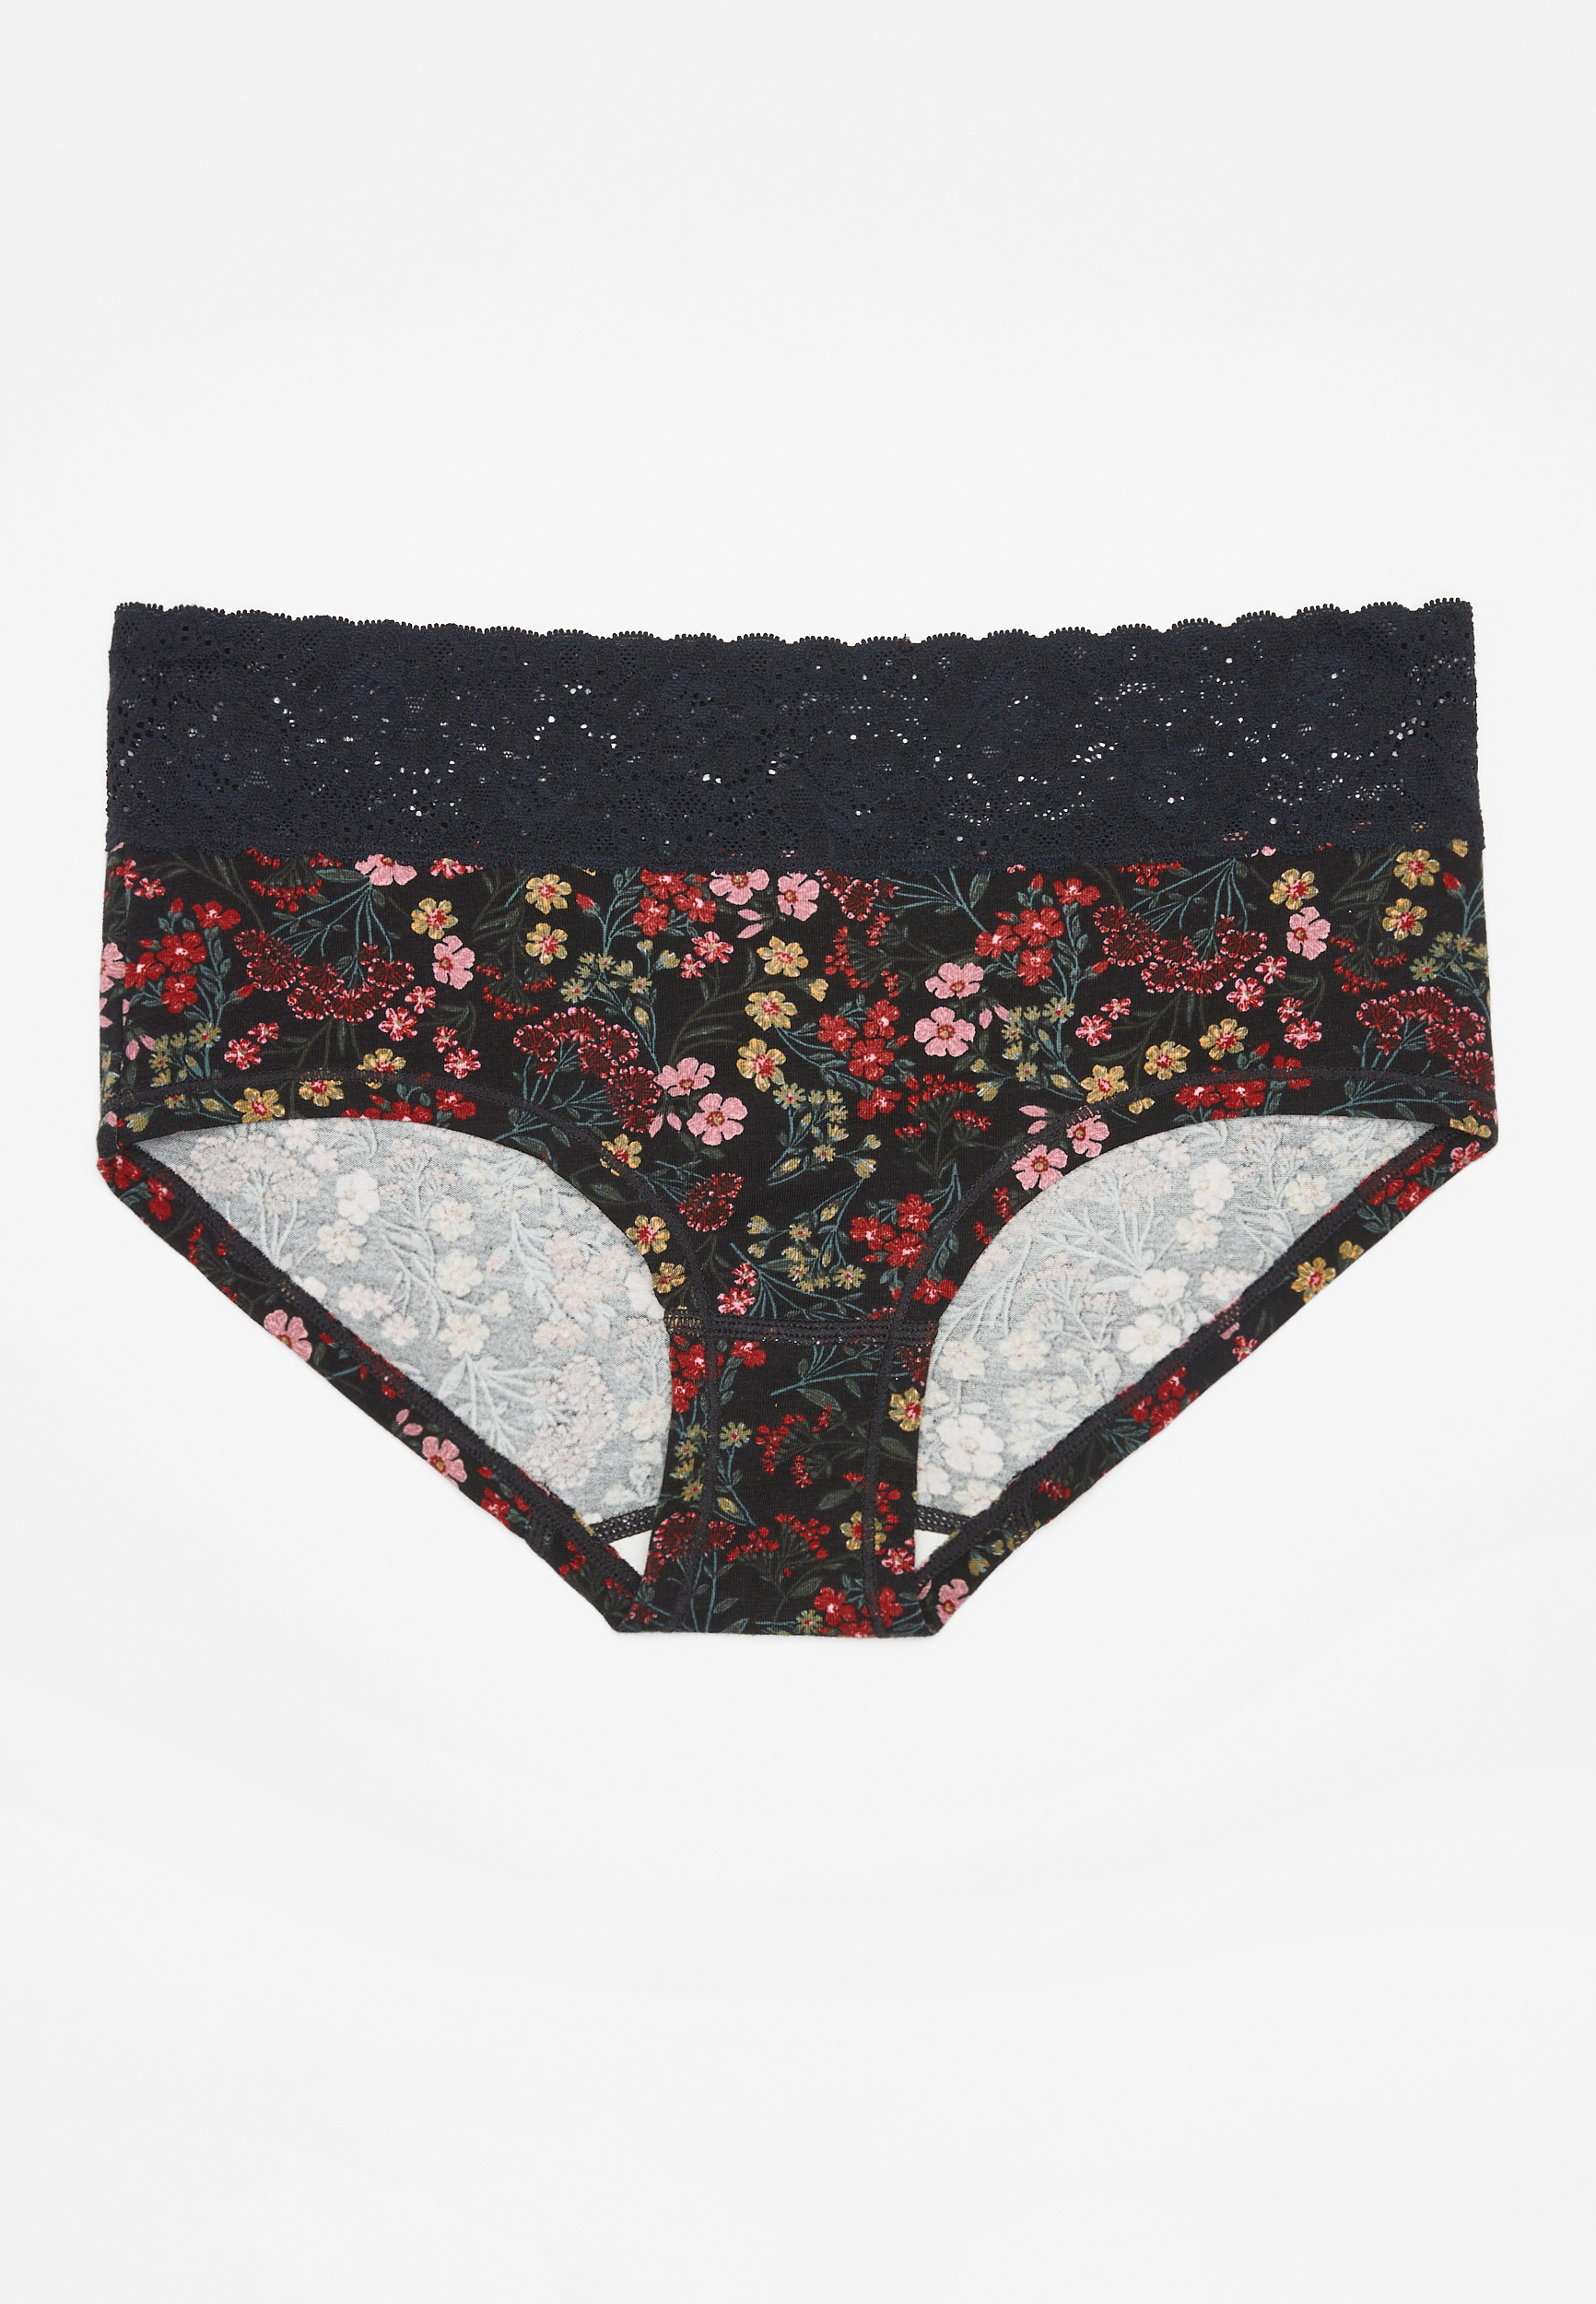 Simply Comfy Wide Lace Trim Floral Boybrief Cotton Panty | maurices